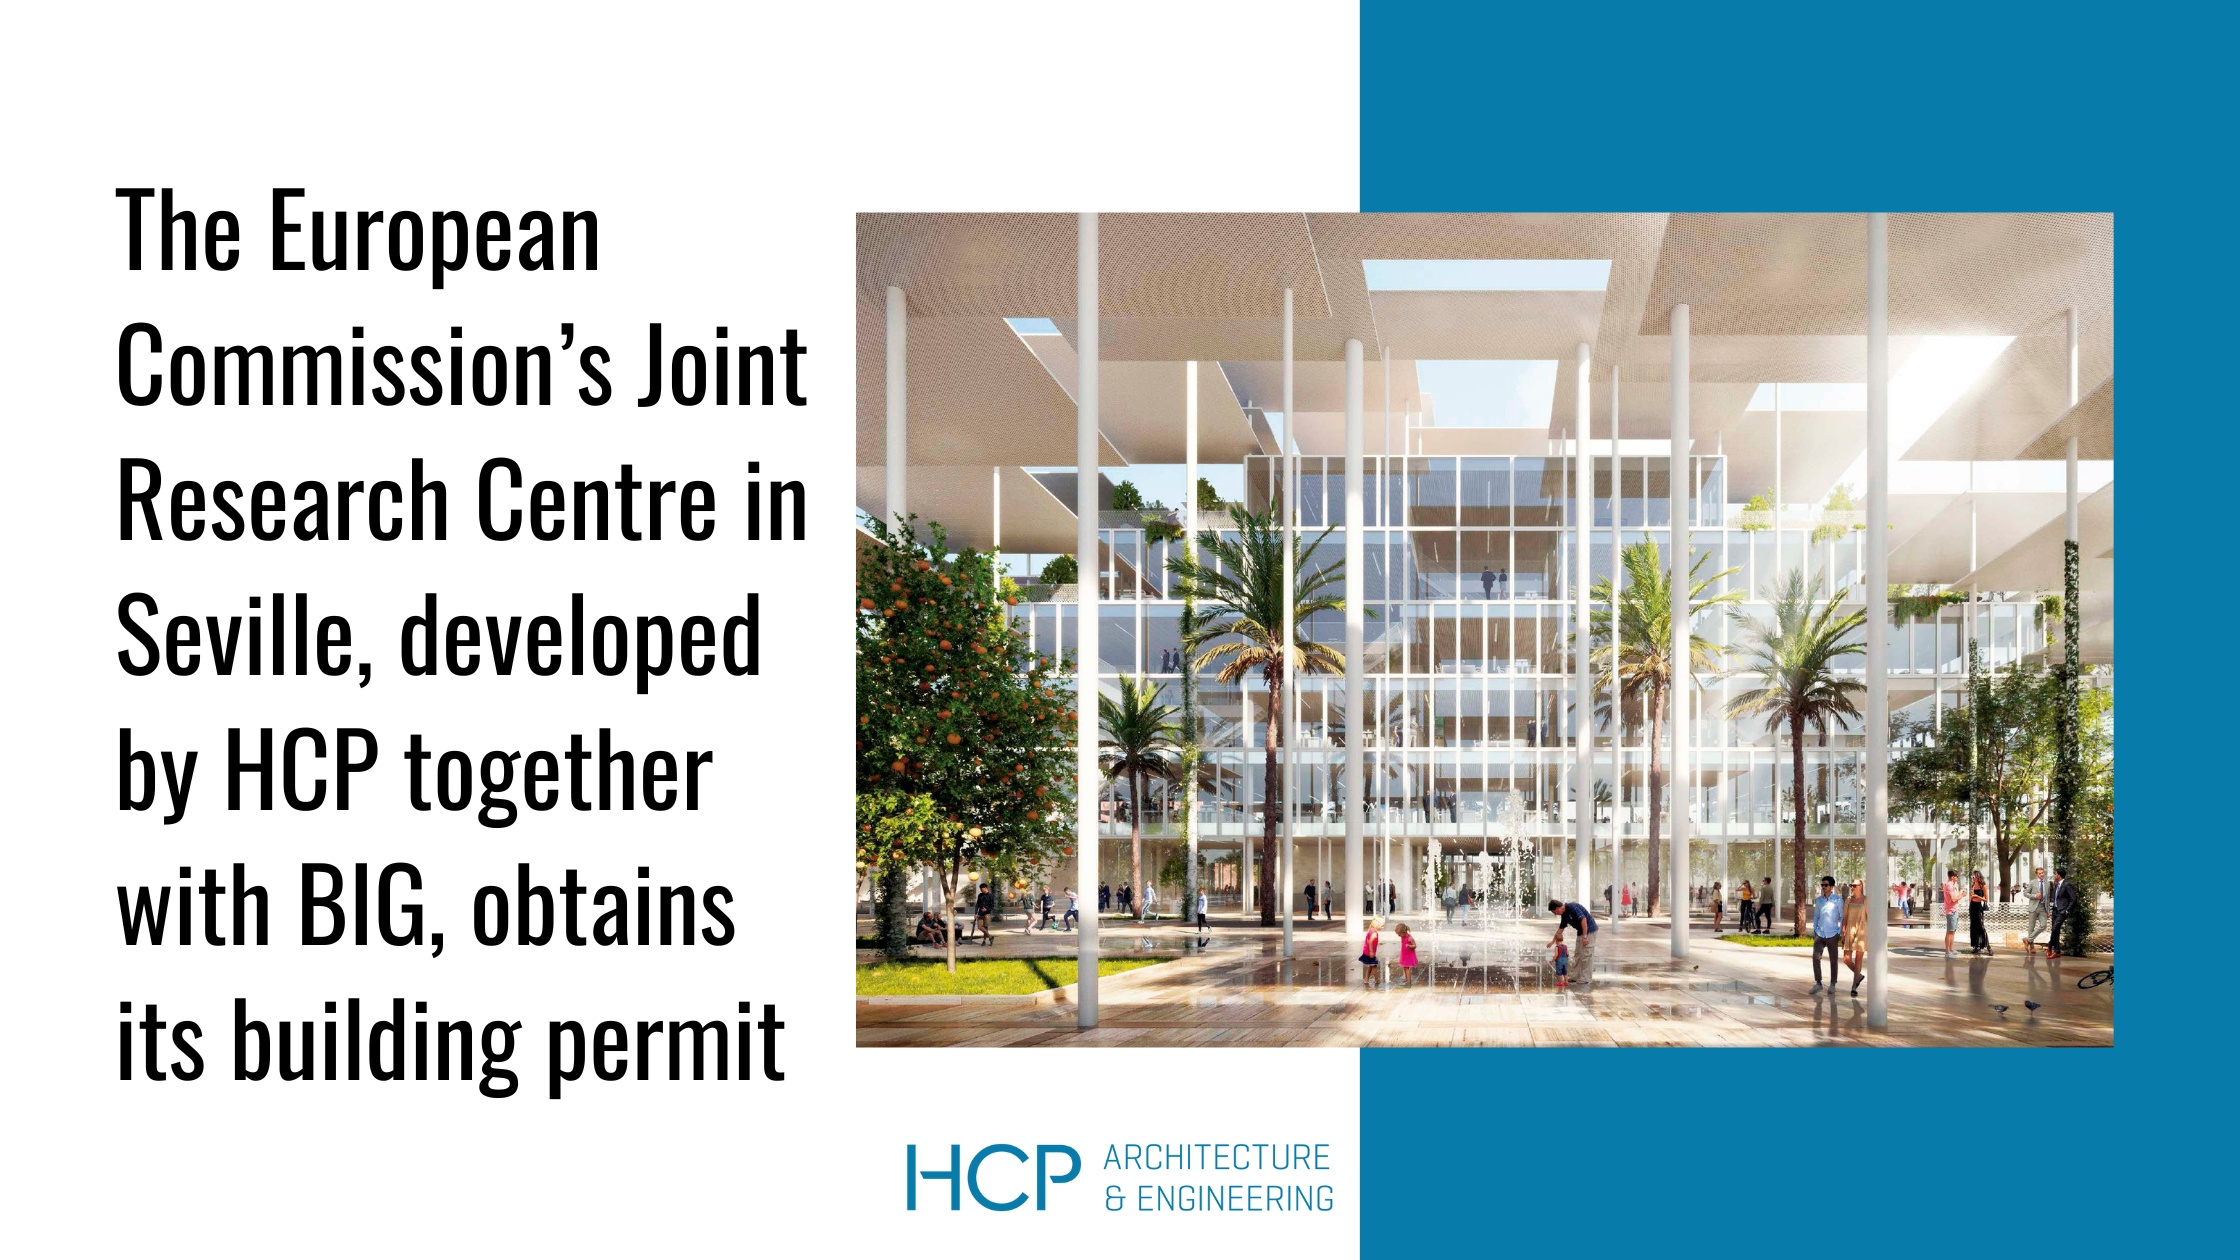 The European Commission's Joint Research Centre in Seville, developed by Spanish architecture firm HCP together with BIG, obtains its building permit.